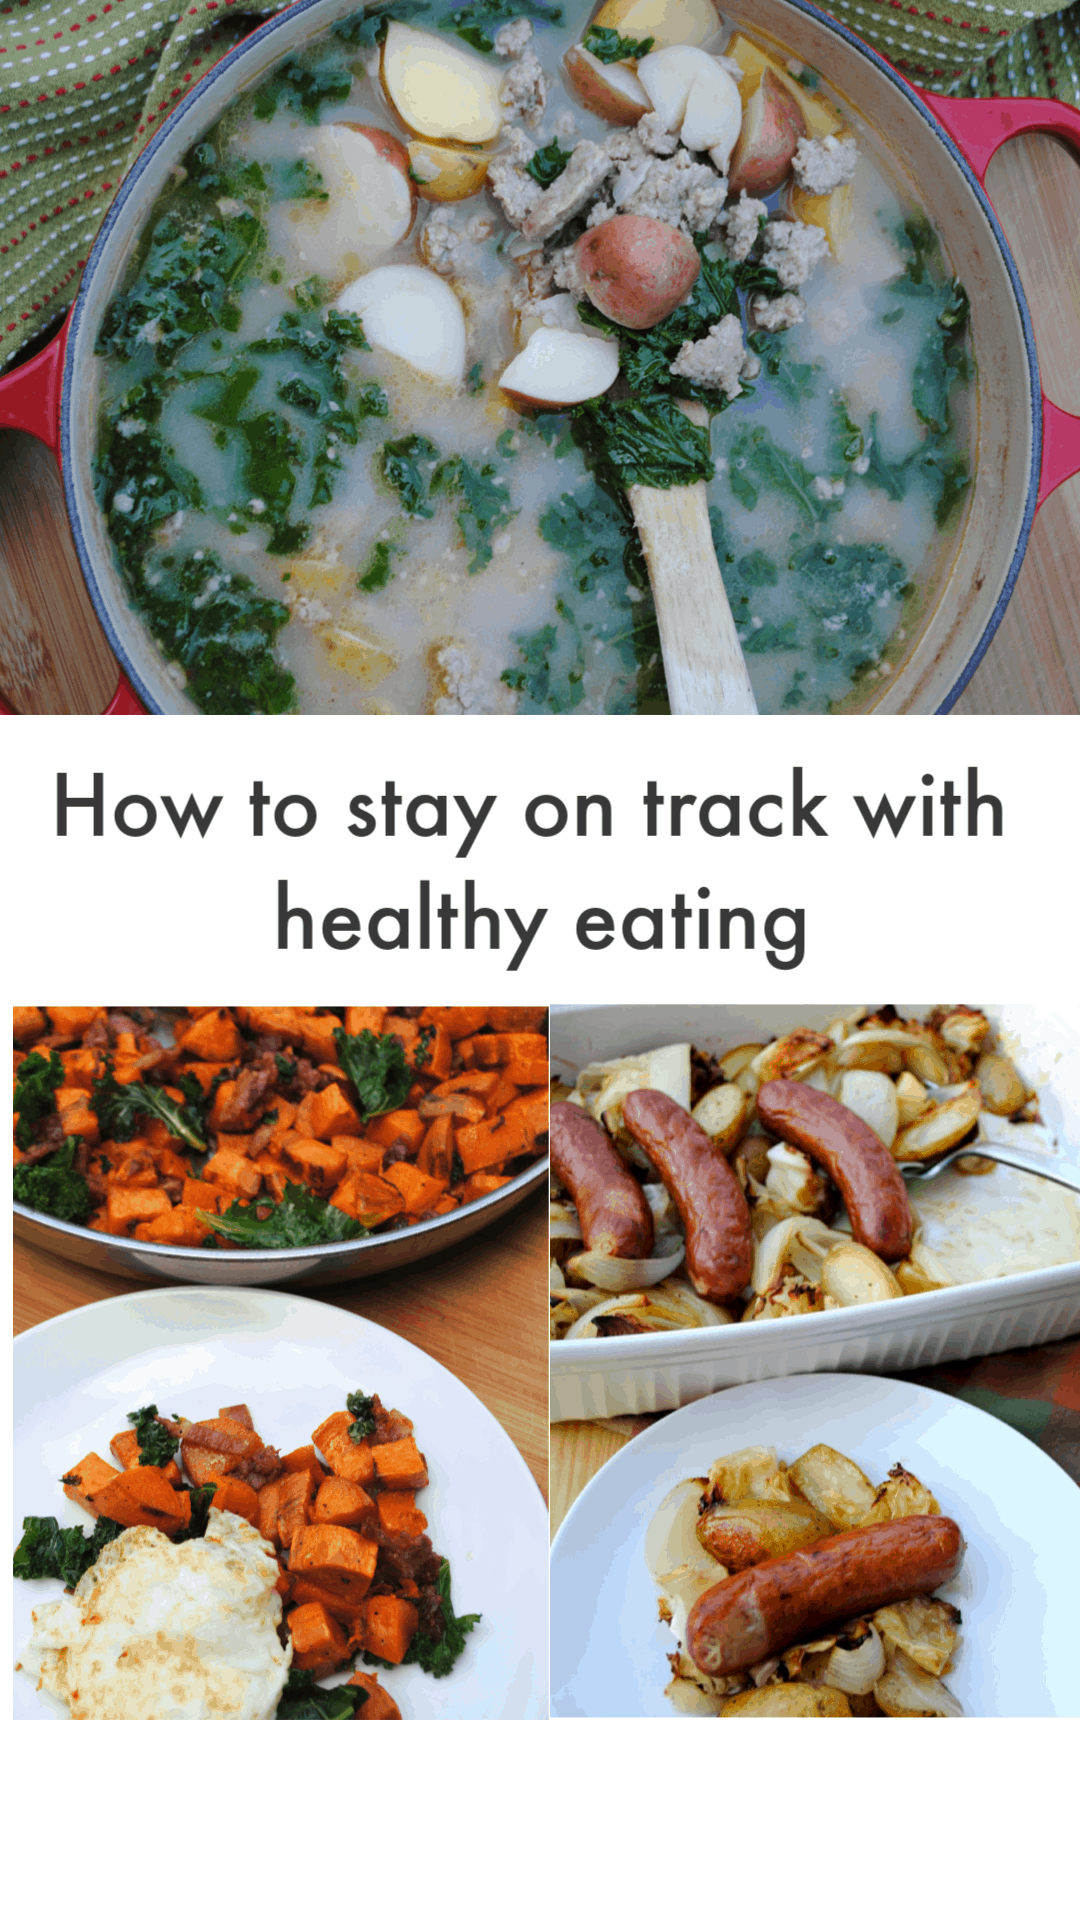 How to stay on track with healthy eating by keeping it simple.